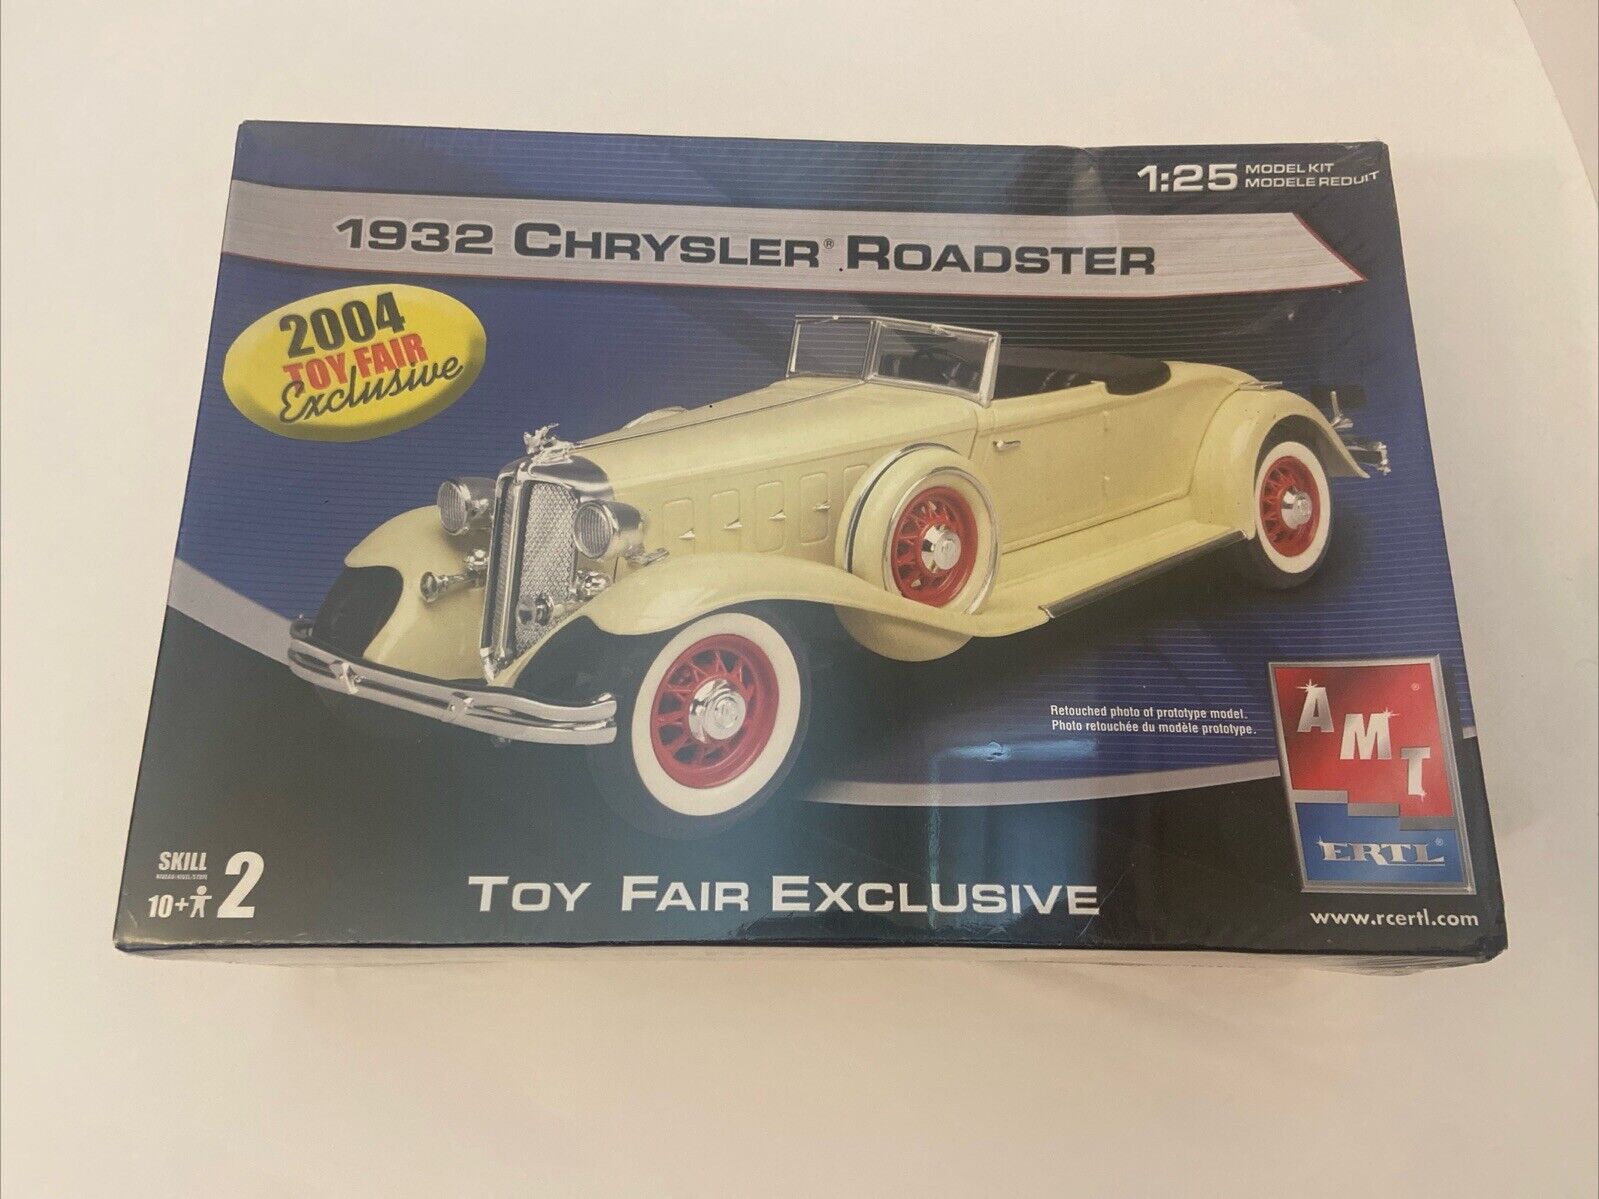 AMT 1932 Chrysler Roadster Toy Fair Exclusive Plastic Model Kit Factory Sealed